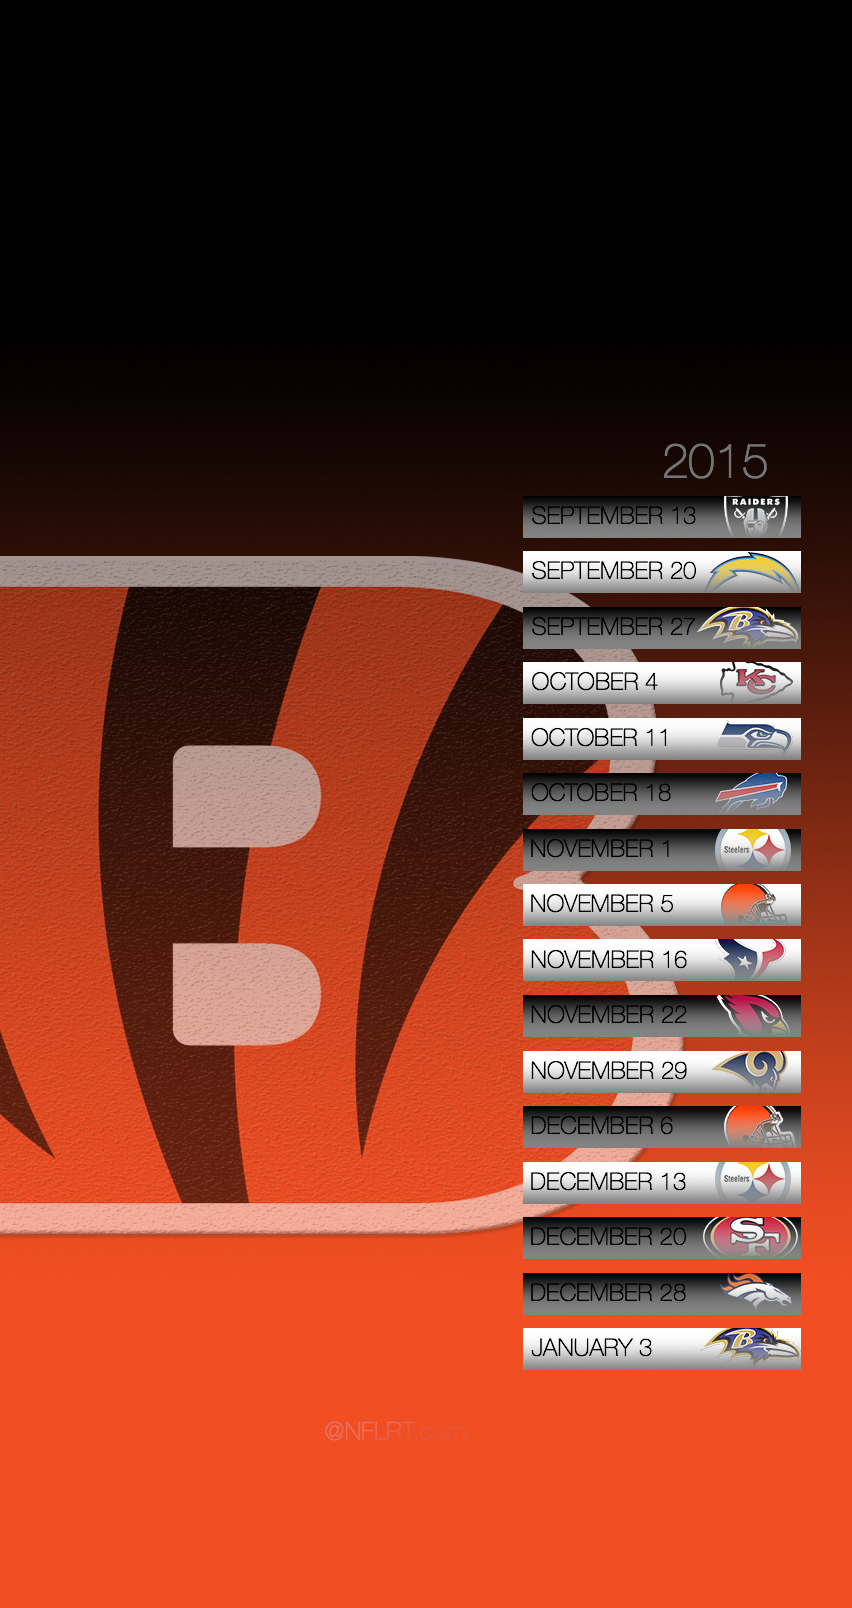 2015 NFL Schedule Wallpapers   Page 3 of 8   NFLRT